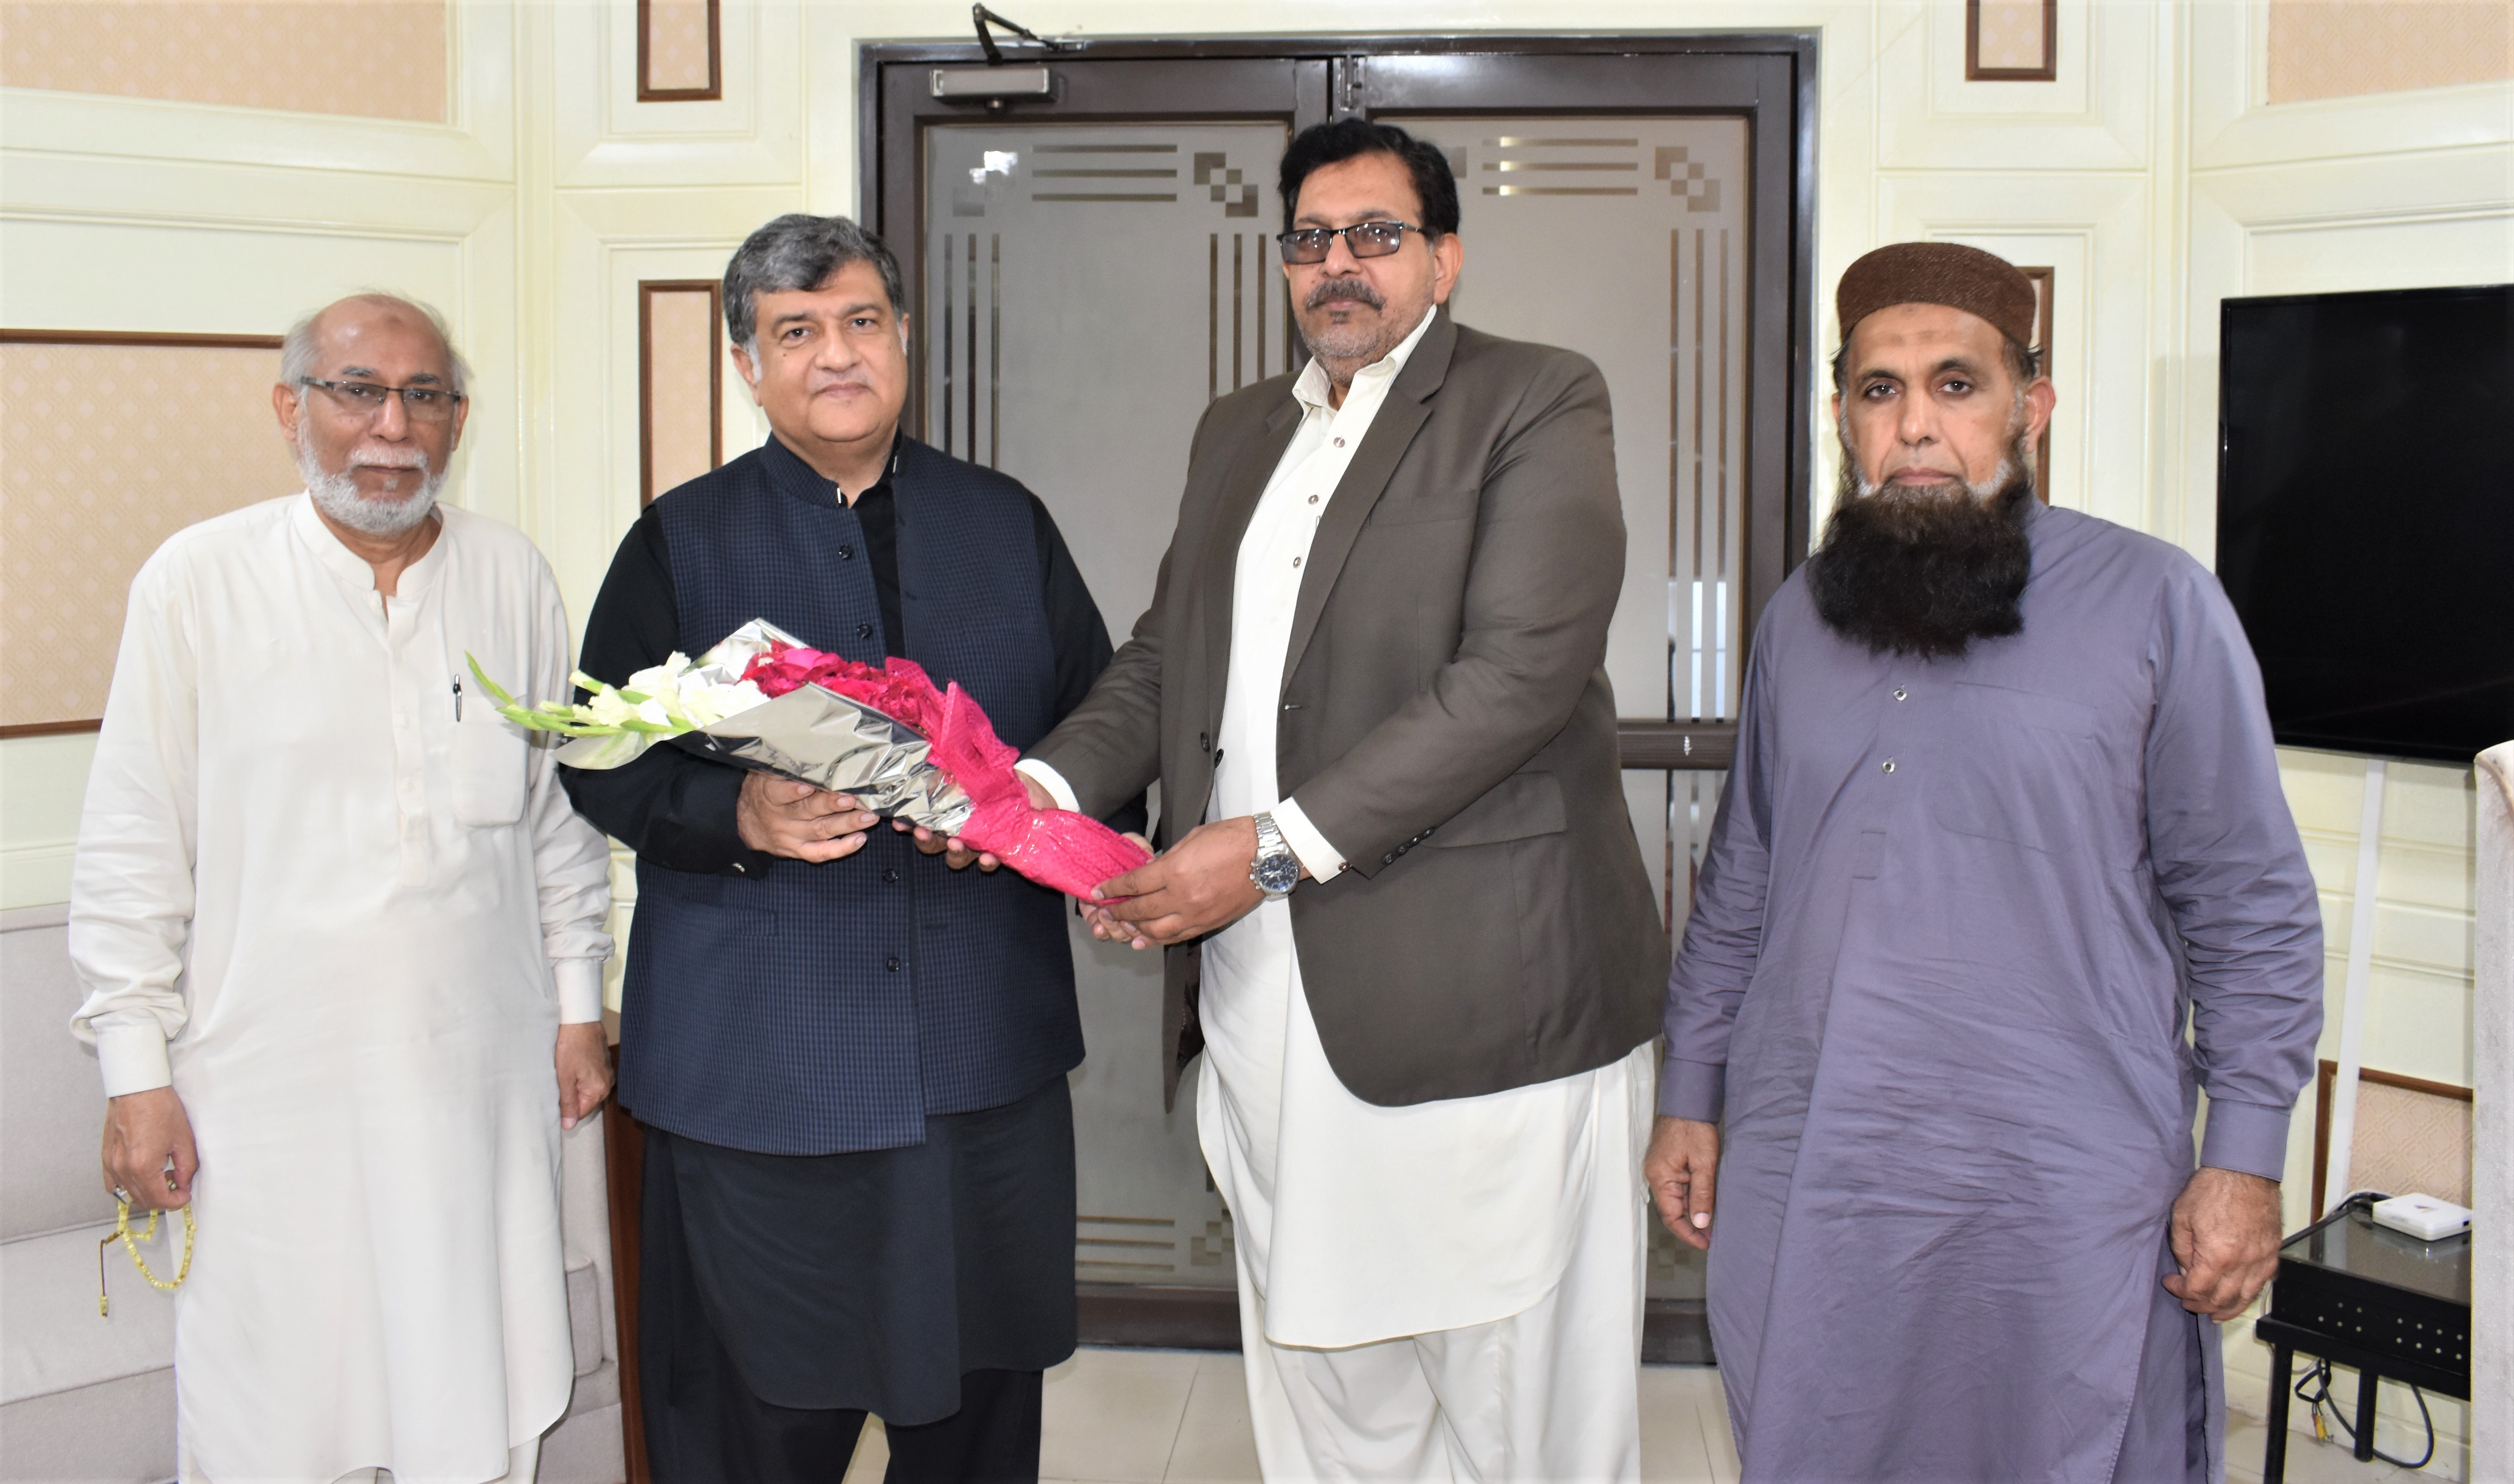 On October 26, 2021, President, Sialkot Chamber of Commerce & Industry had a meeting with Mr. Rana Muhammad Shabbir, Principal, Govt. College of Technology, Sialkot to discuss matters of mutual Interest.